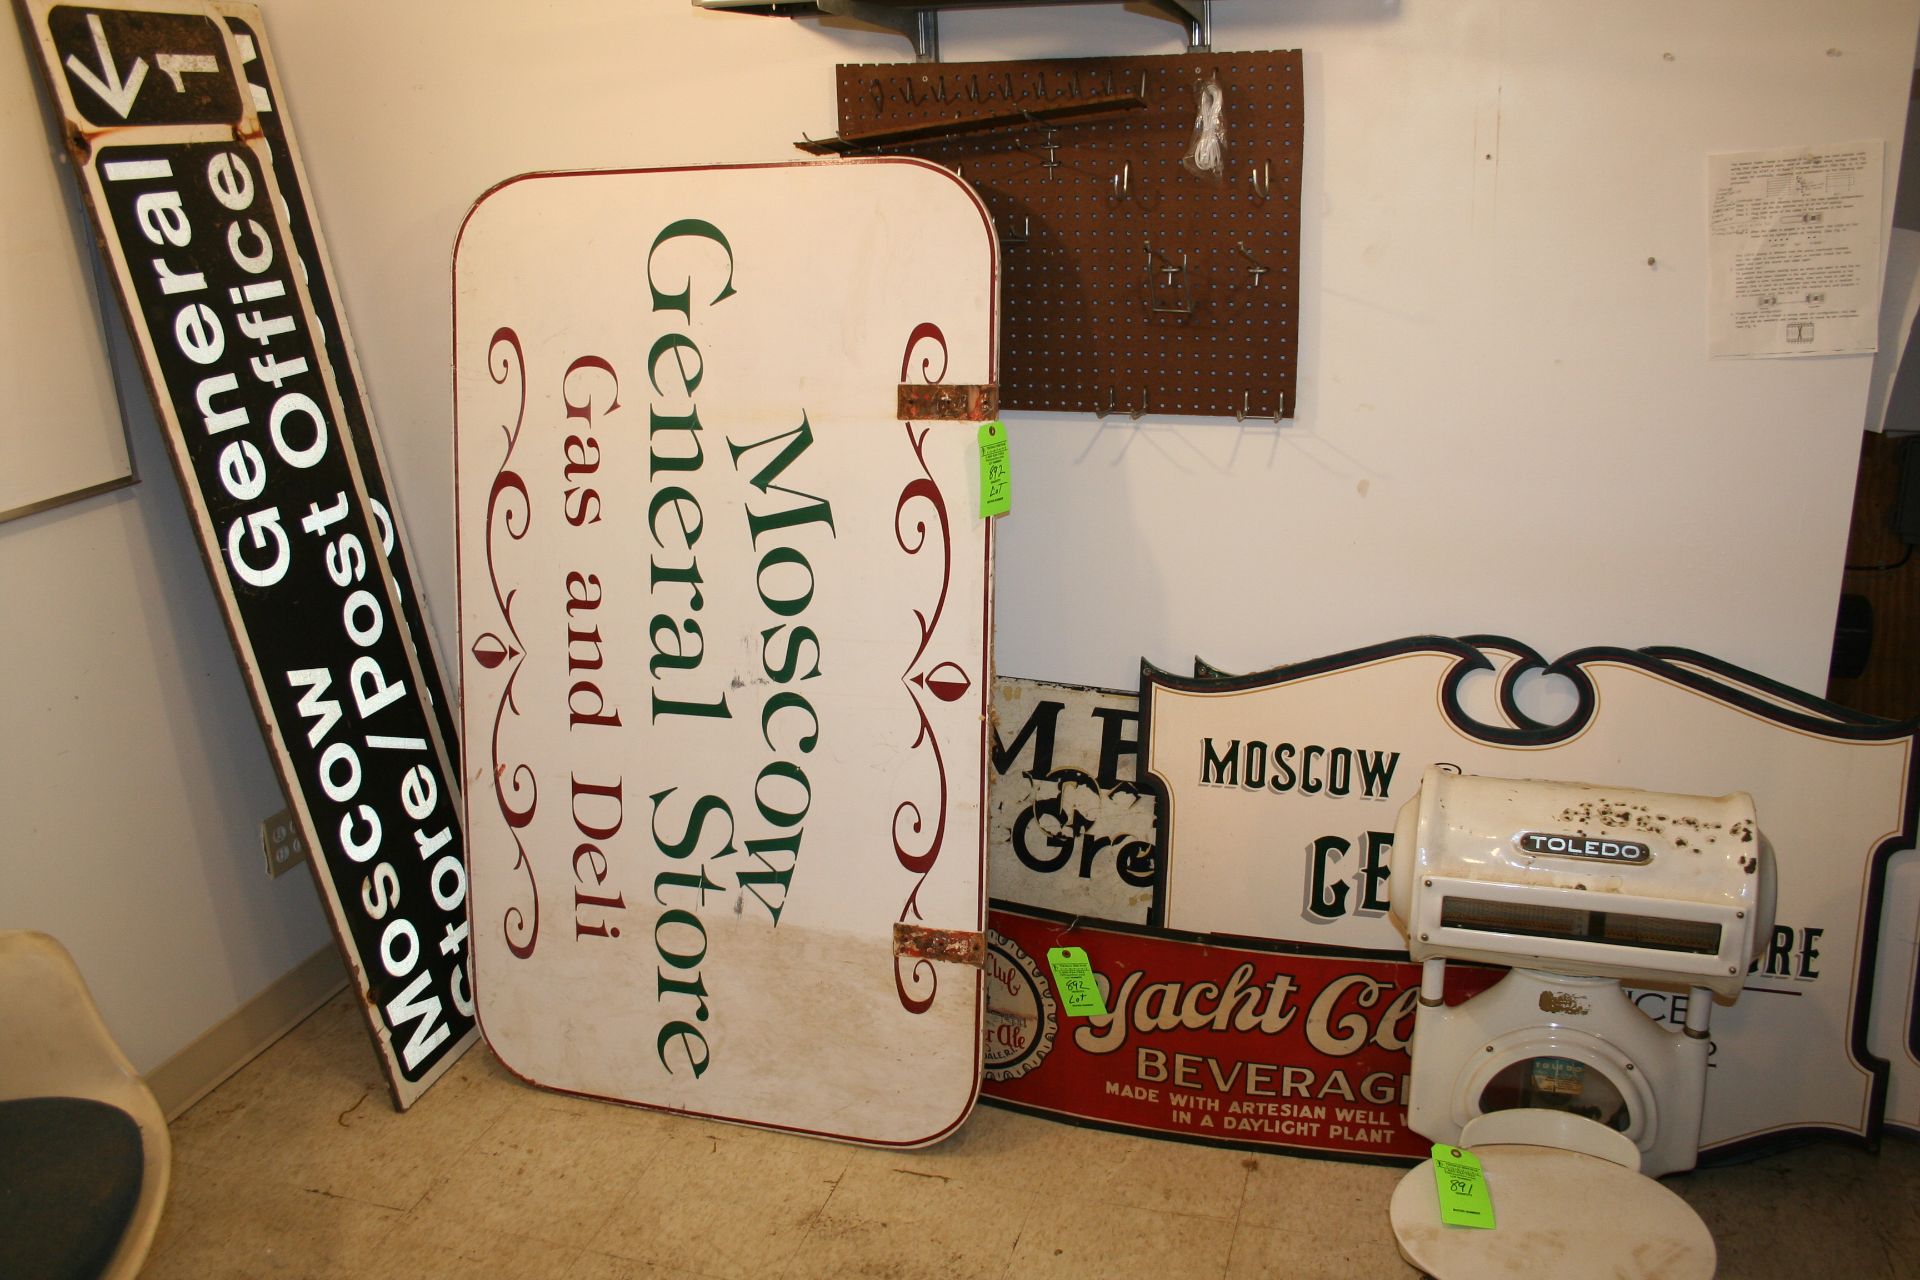 Lot: Moscow General Store Signage w/ yacht club beverage sign